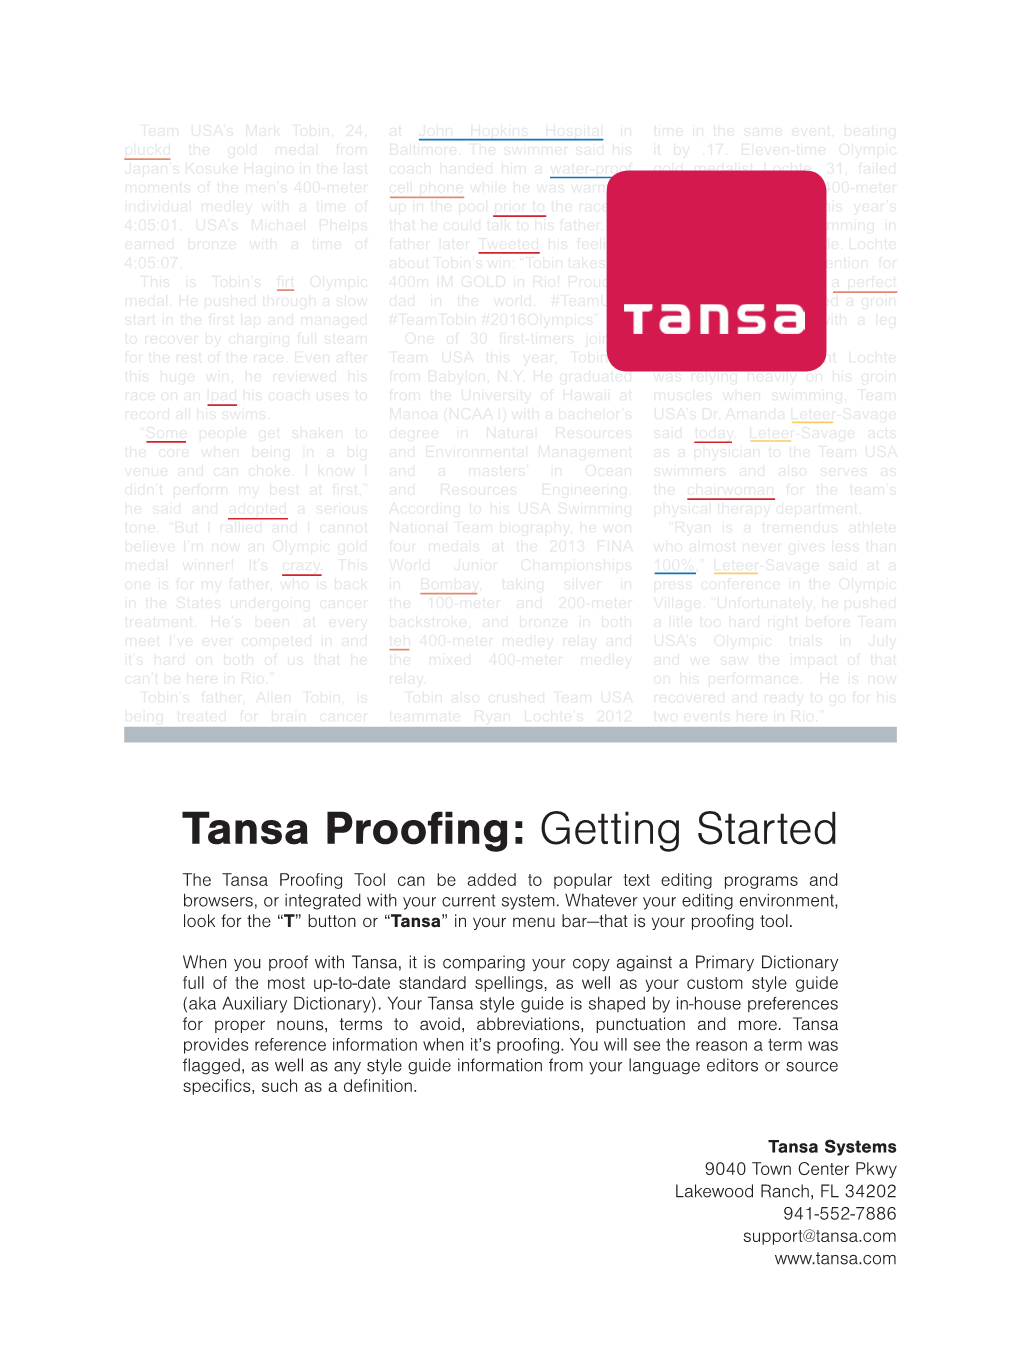 Tansa Proofing:Getting Started the Tansa Proofing Tool Can Be Added to Popular Text Editing Programs and Browsers, Or Integrated with Your Current System